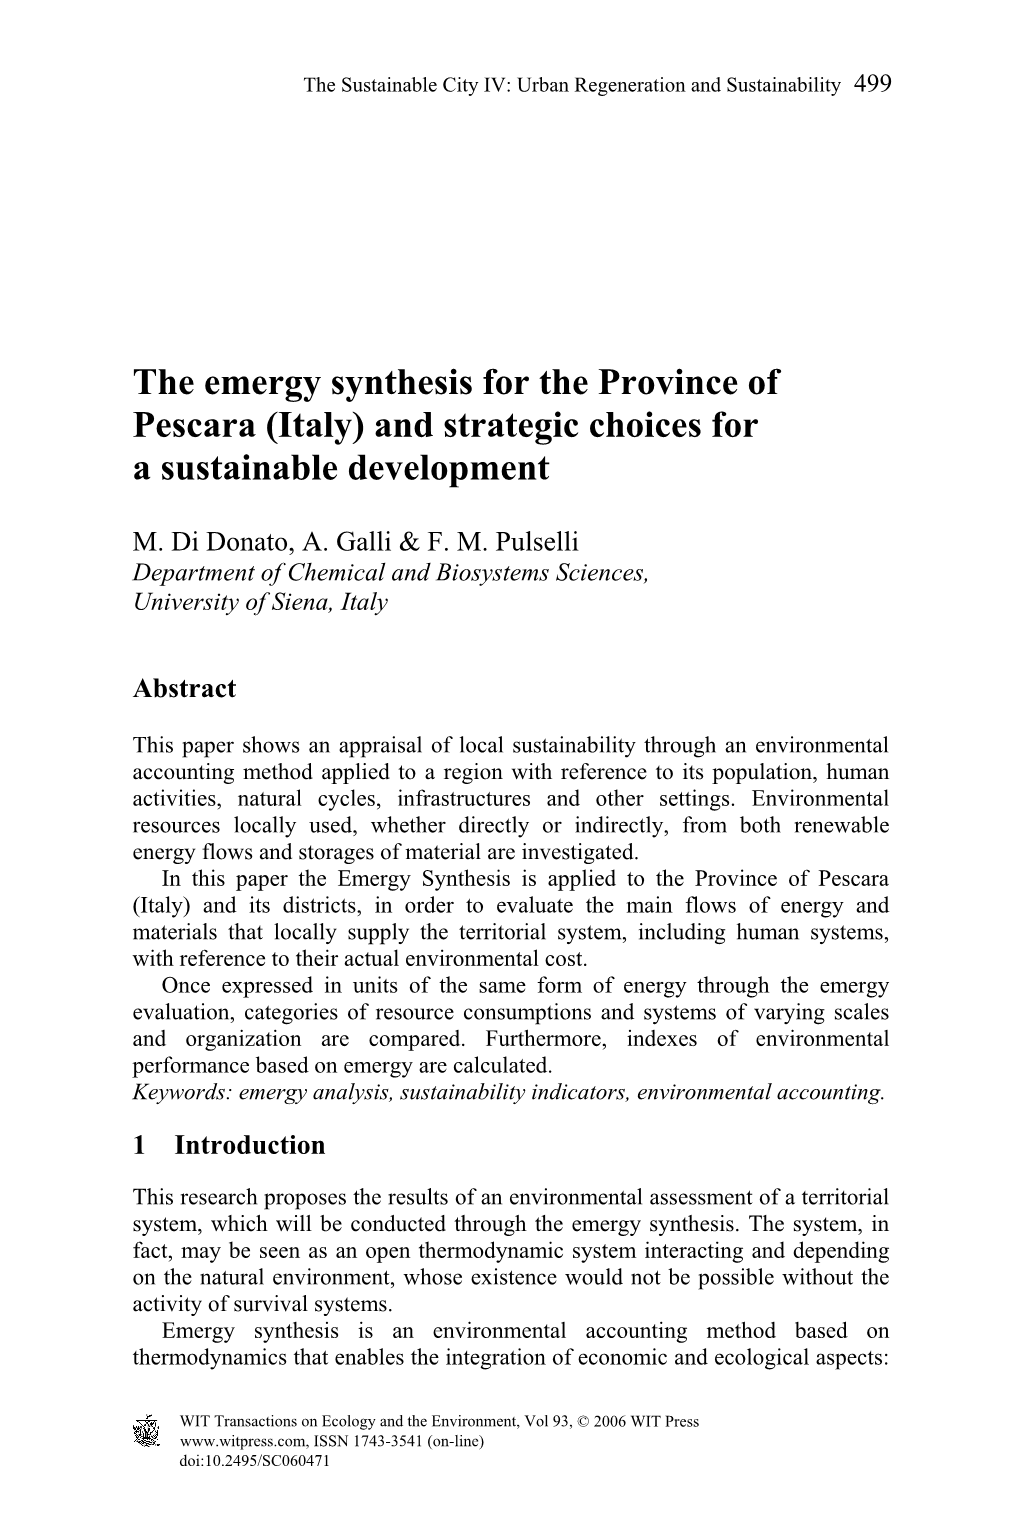 The Emergy Synthesis for the Province of Pescara (Italy) and Strategic Choices for a Sustainable Development